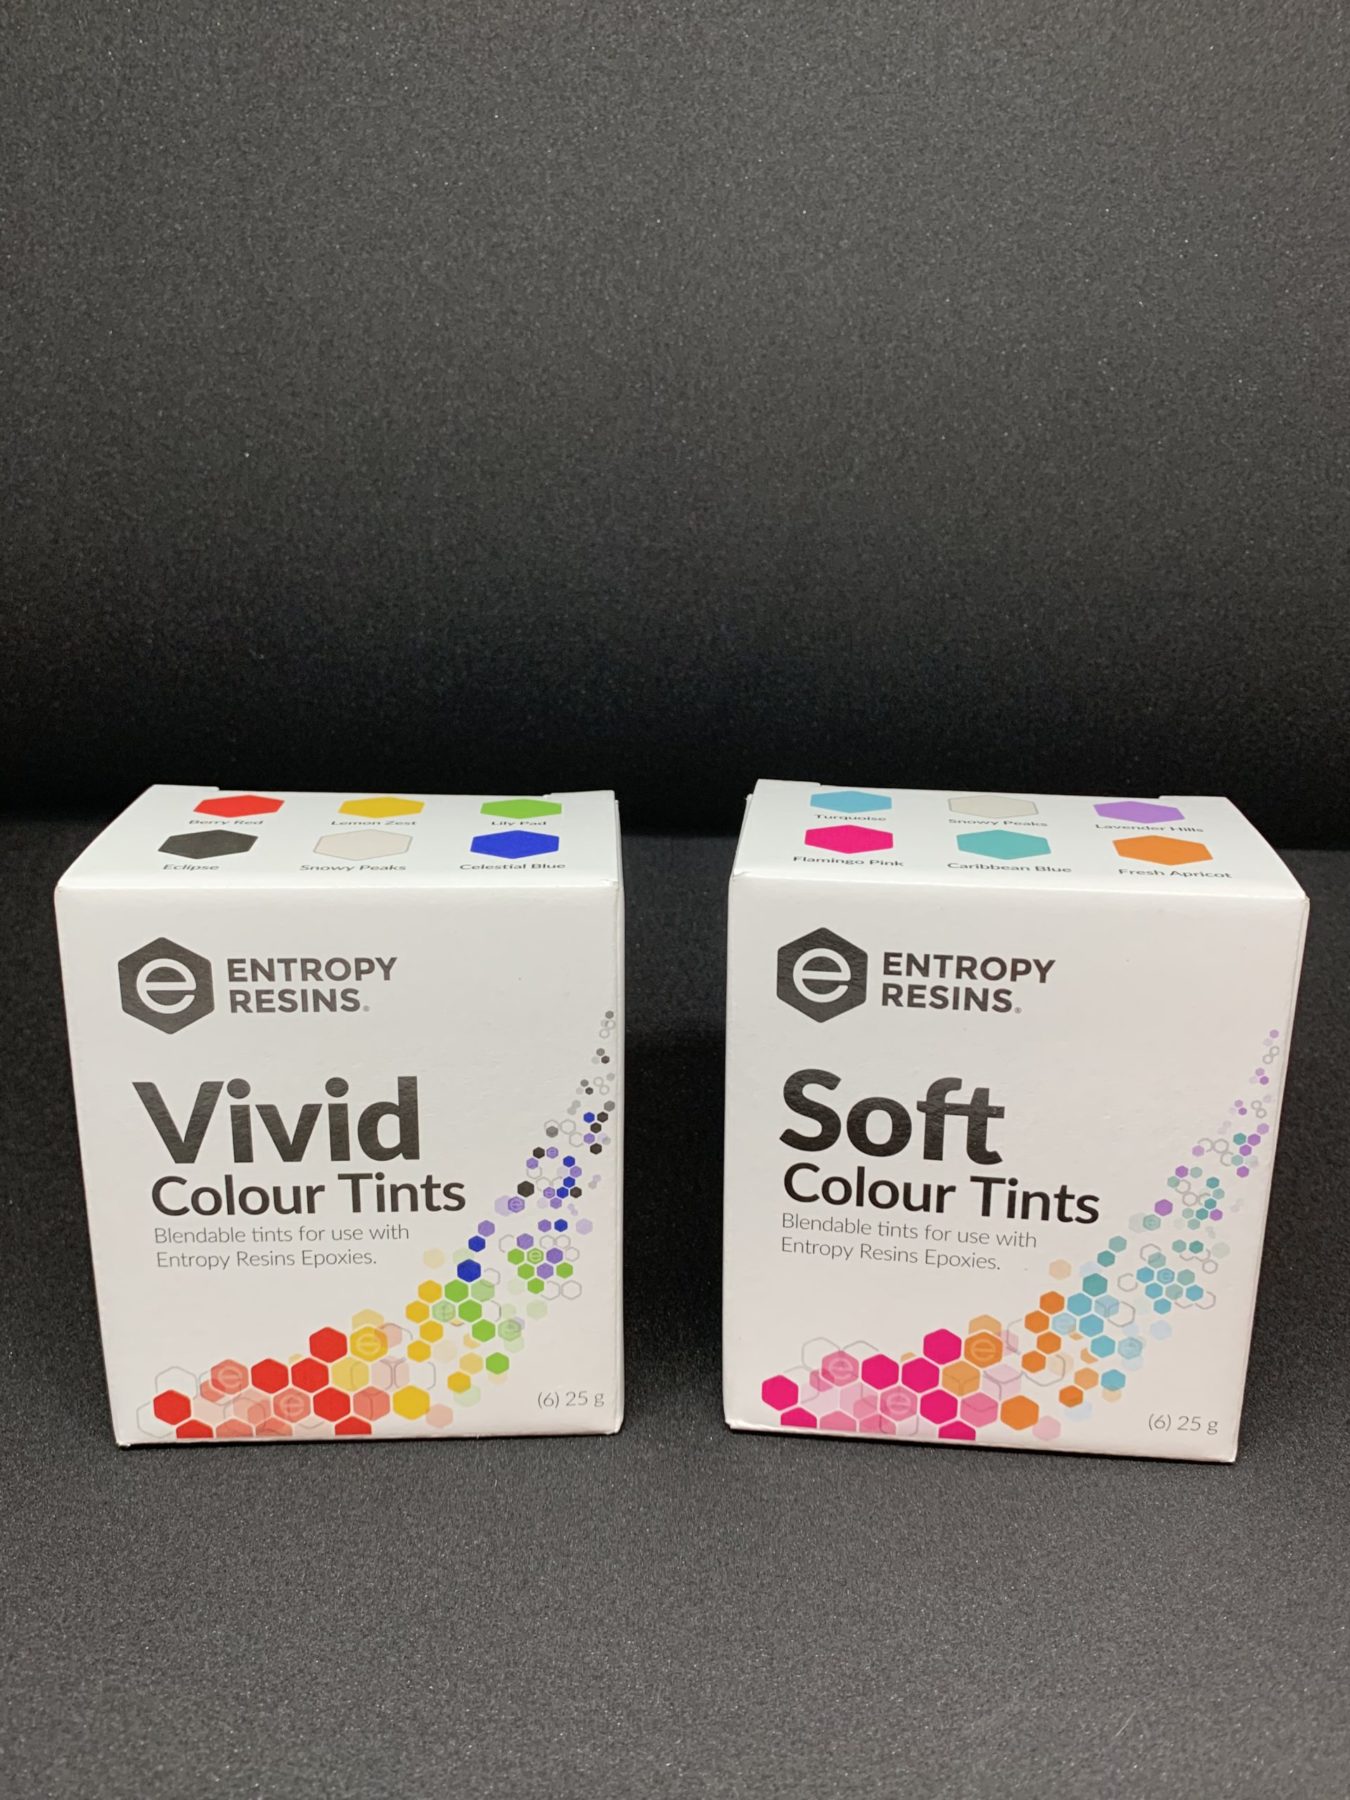 Stunning colour tints for epoxy creations added to ENTROPY RESINS® range